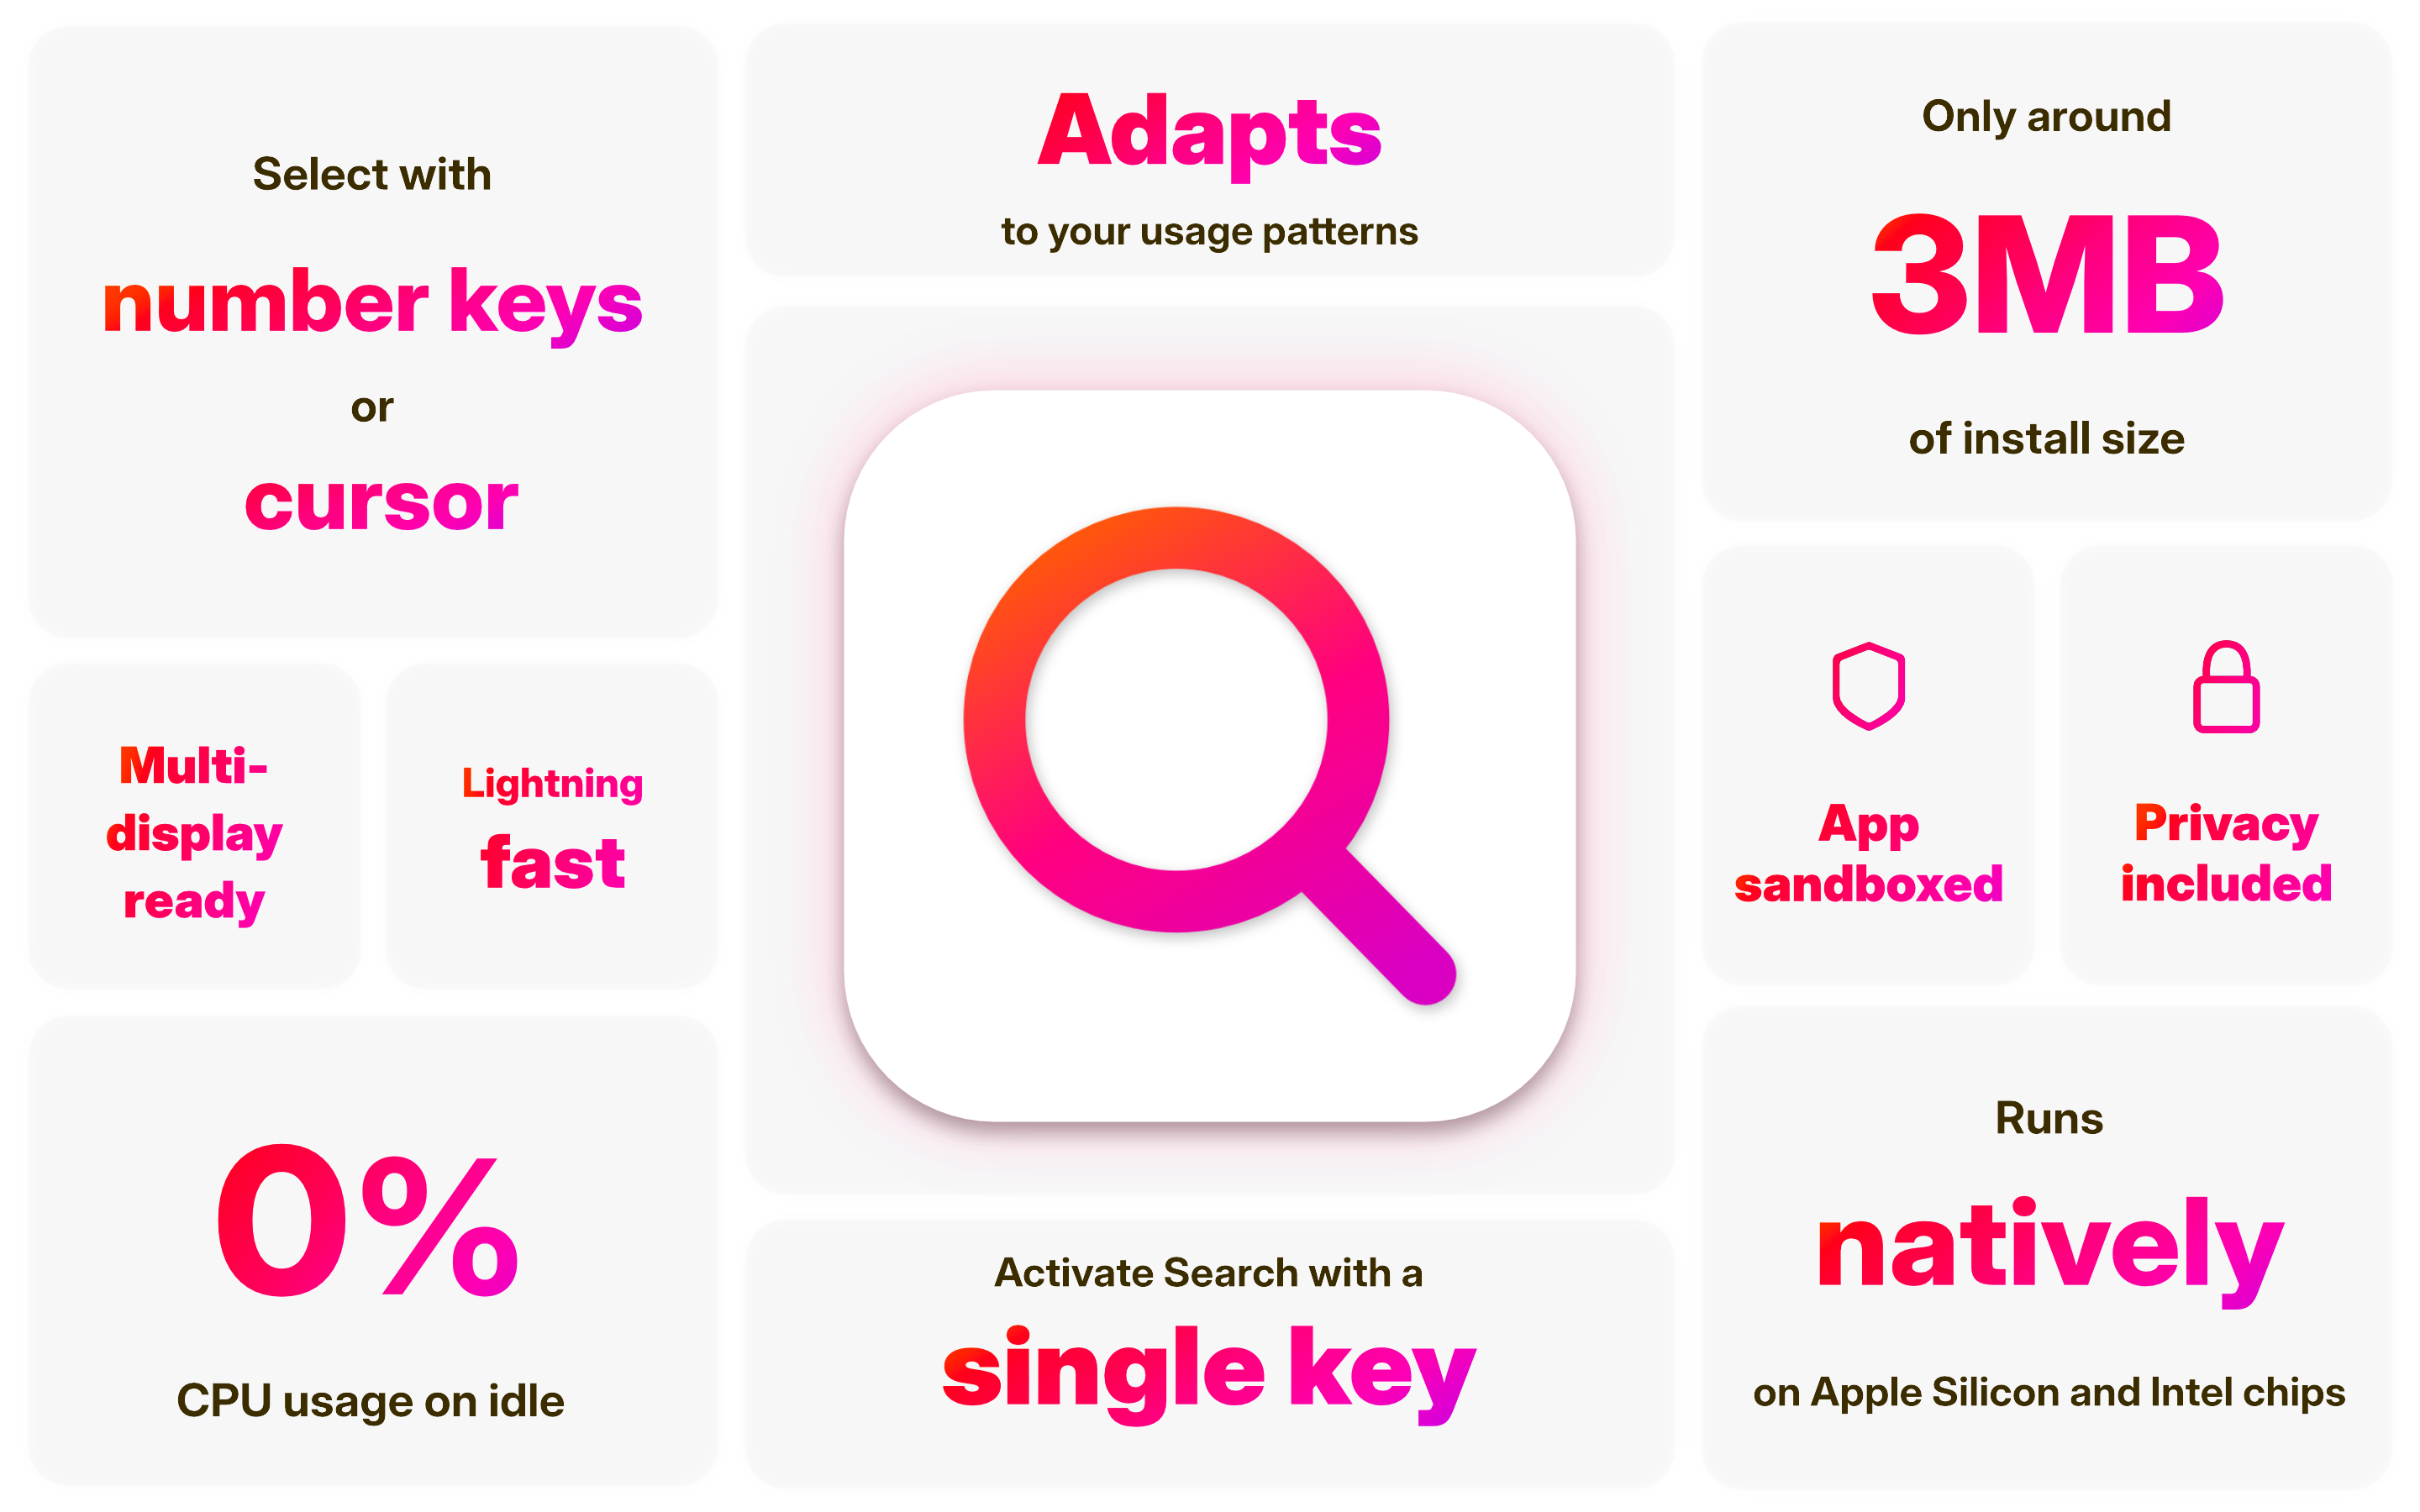 Applight features